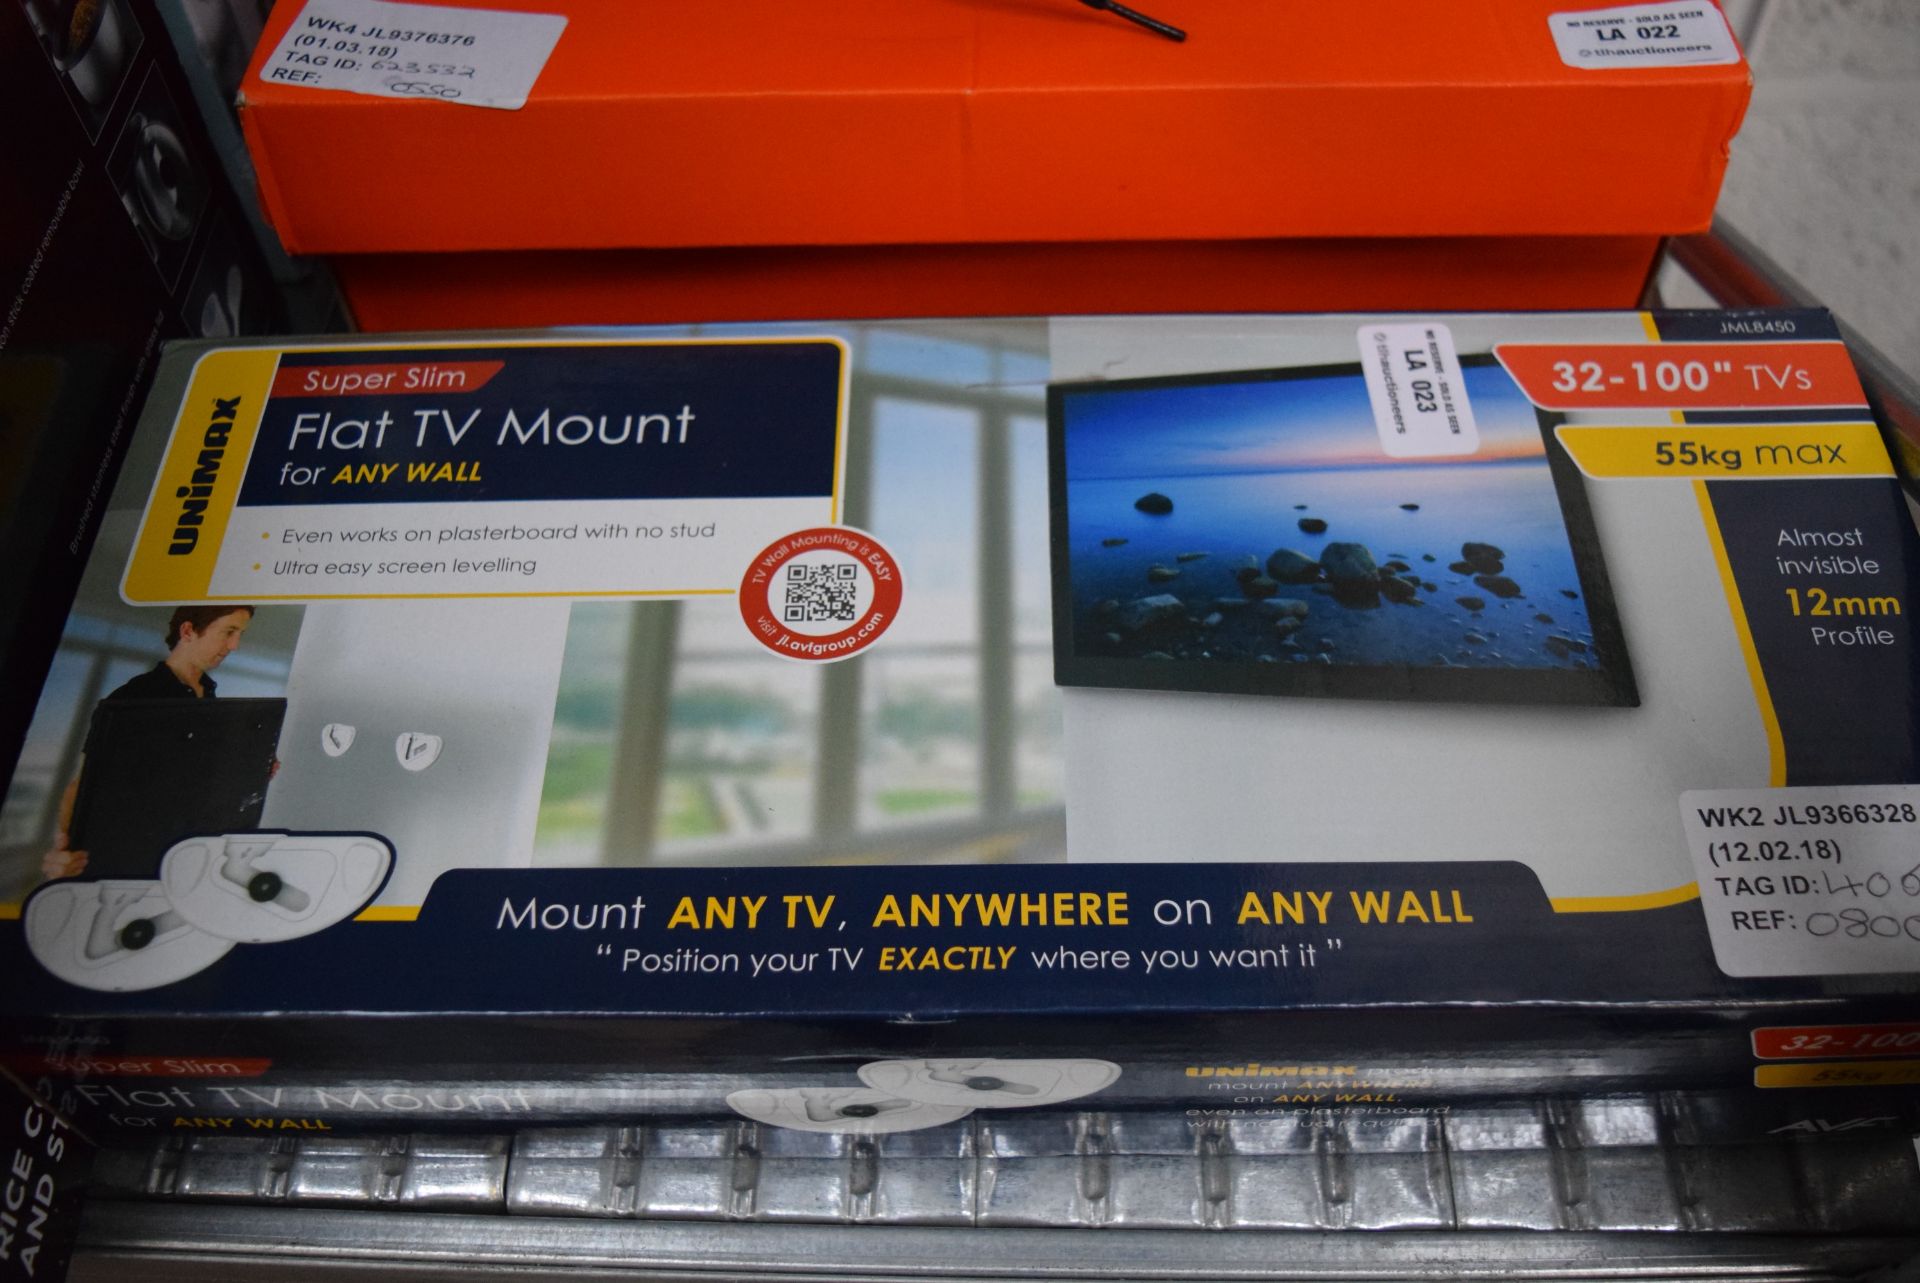 1 x BOXED AVF SUPER SLIM FLAT TV WALL MOUNT 32"-100" TVS RRP £80 12.02.18 406362 *PLEASE NOTE THAT